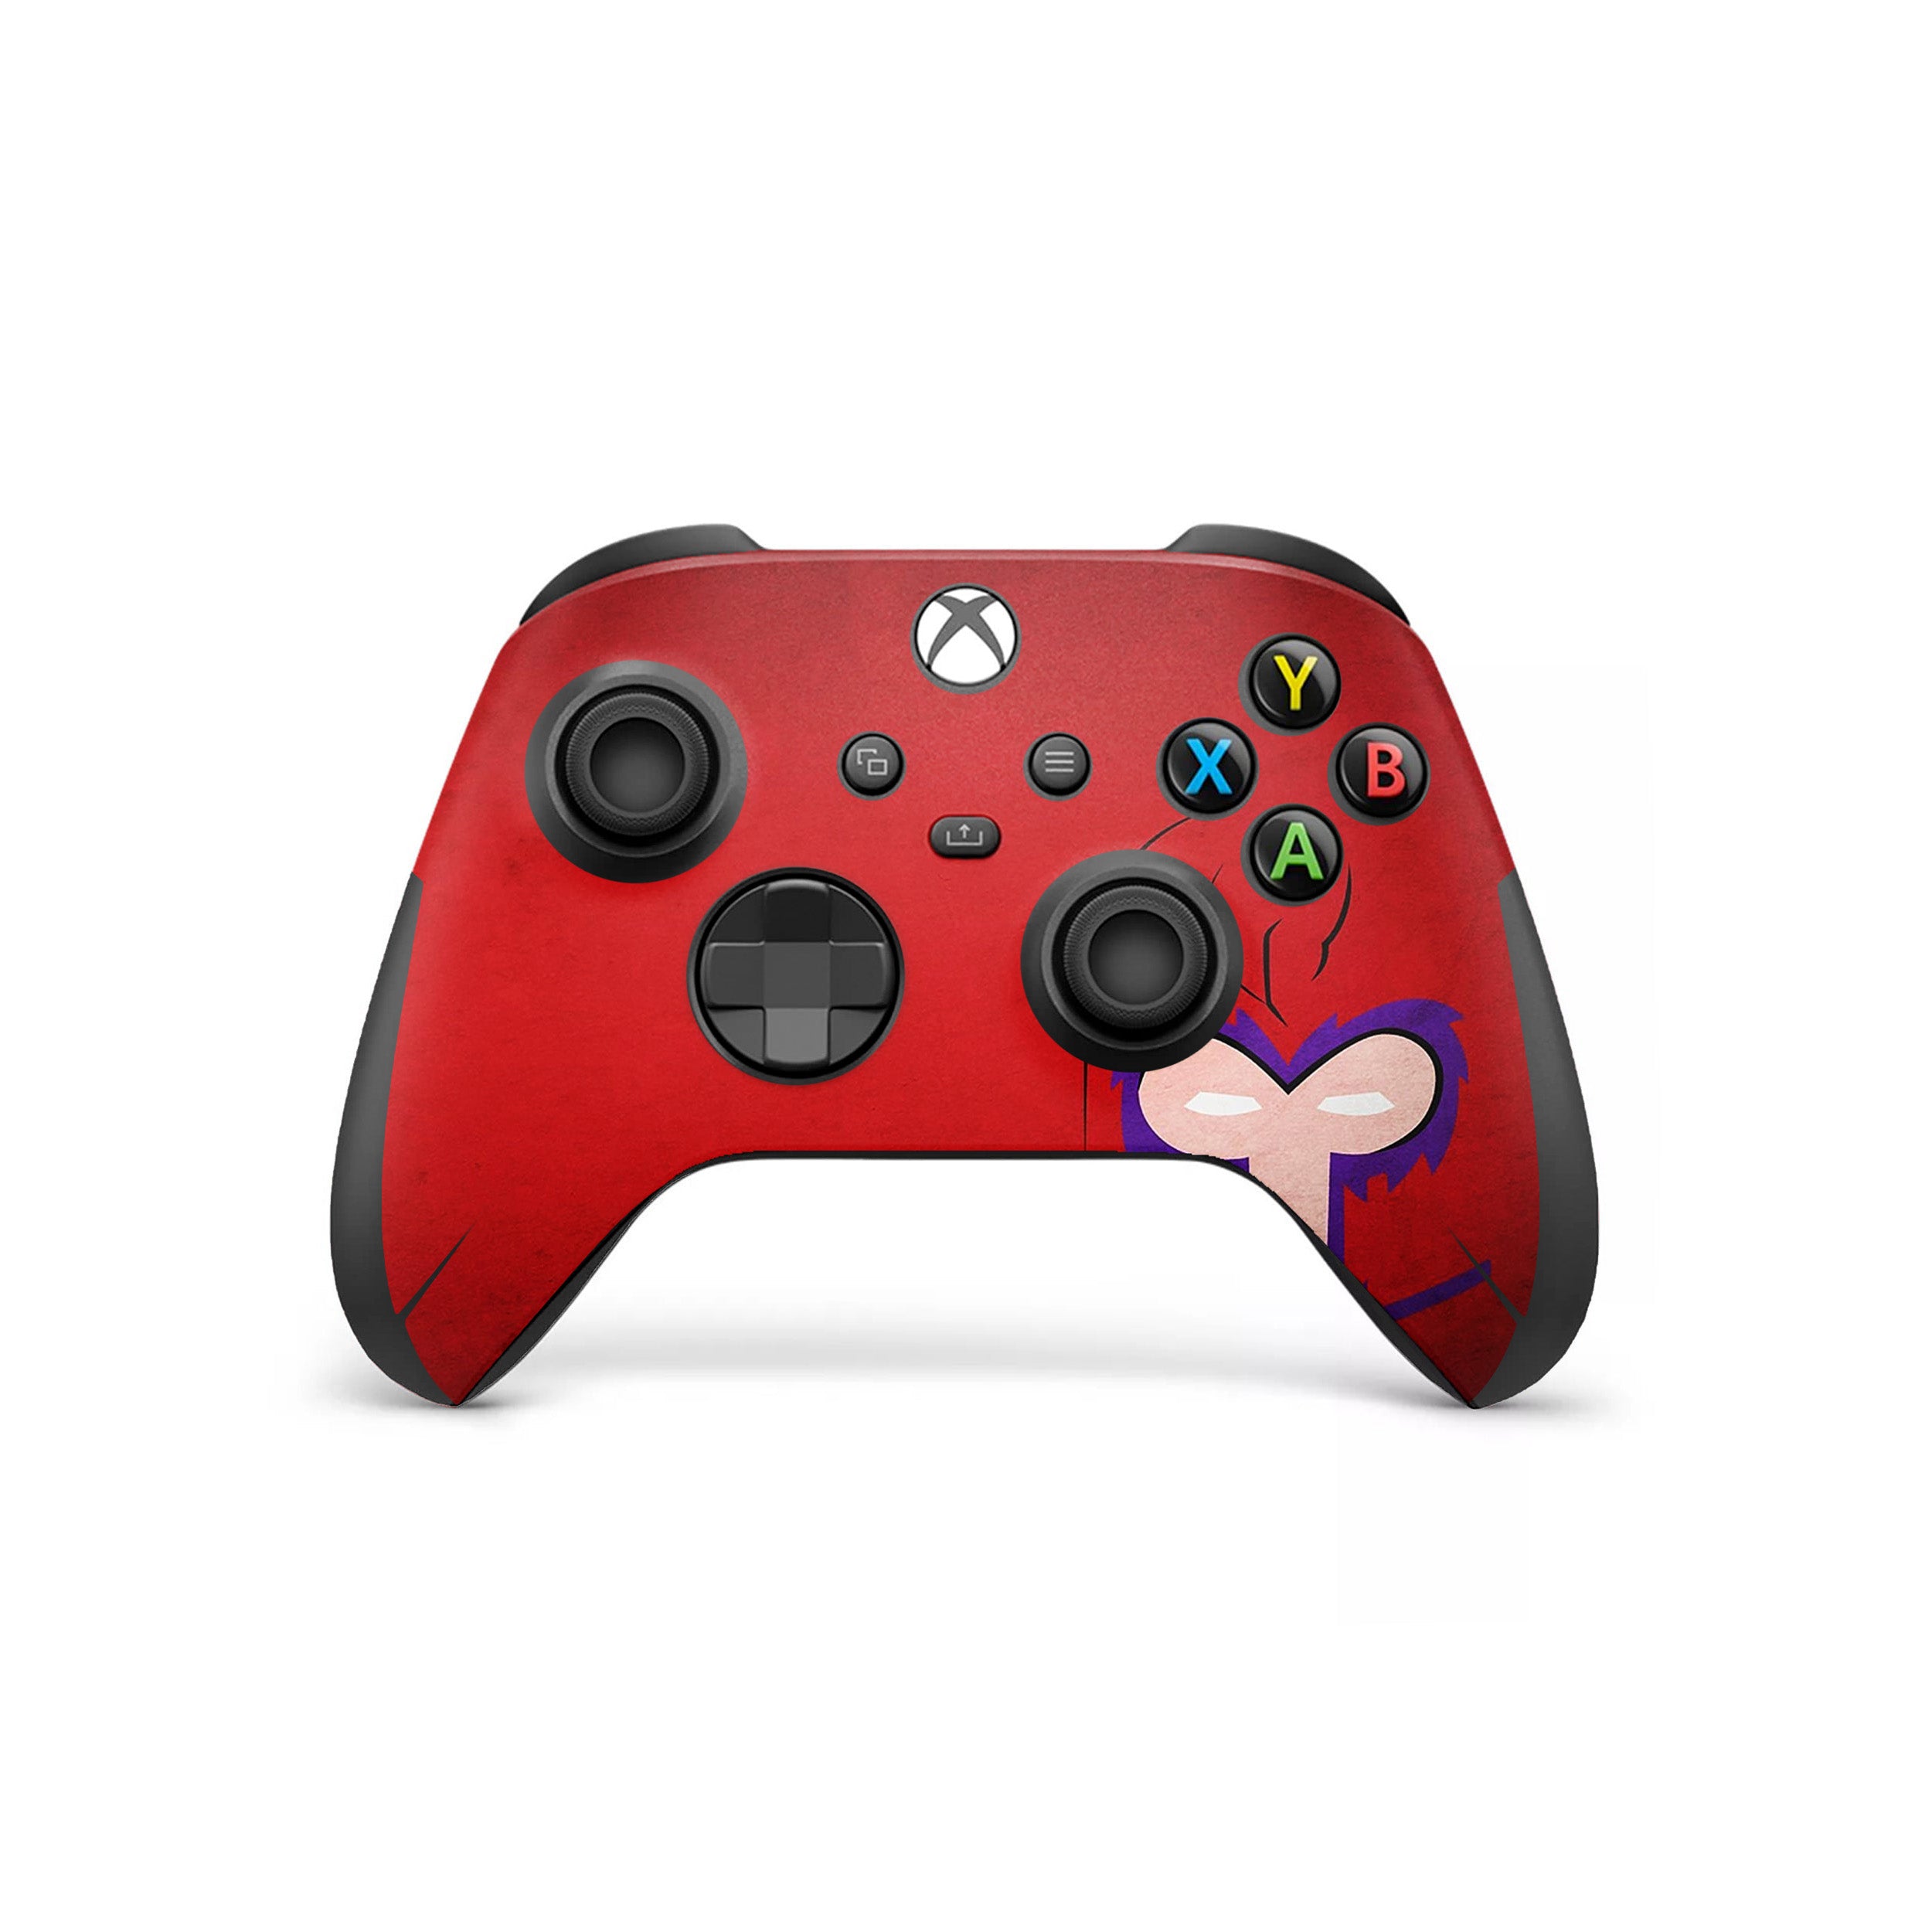 A video game skin featuring a Marvel X Men Magneto design for the Xbox Wireless Controller.